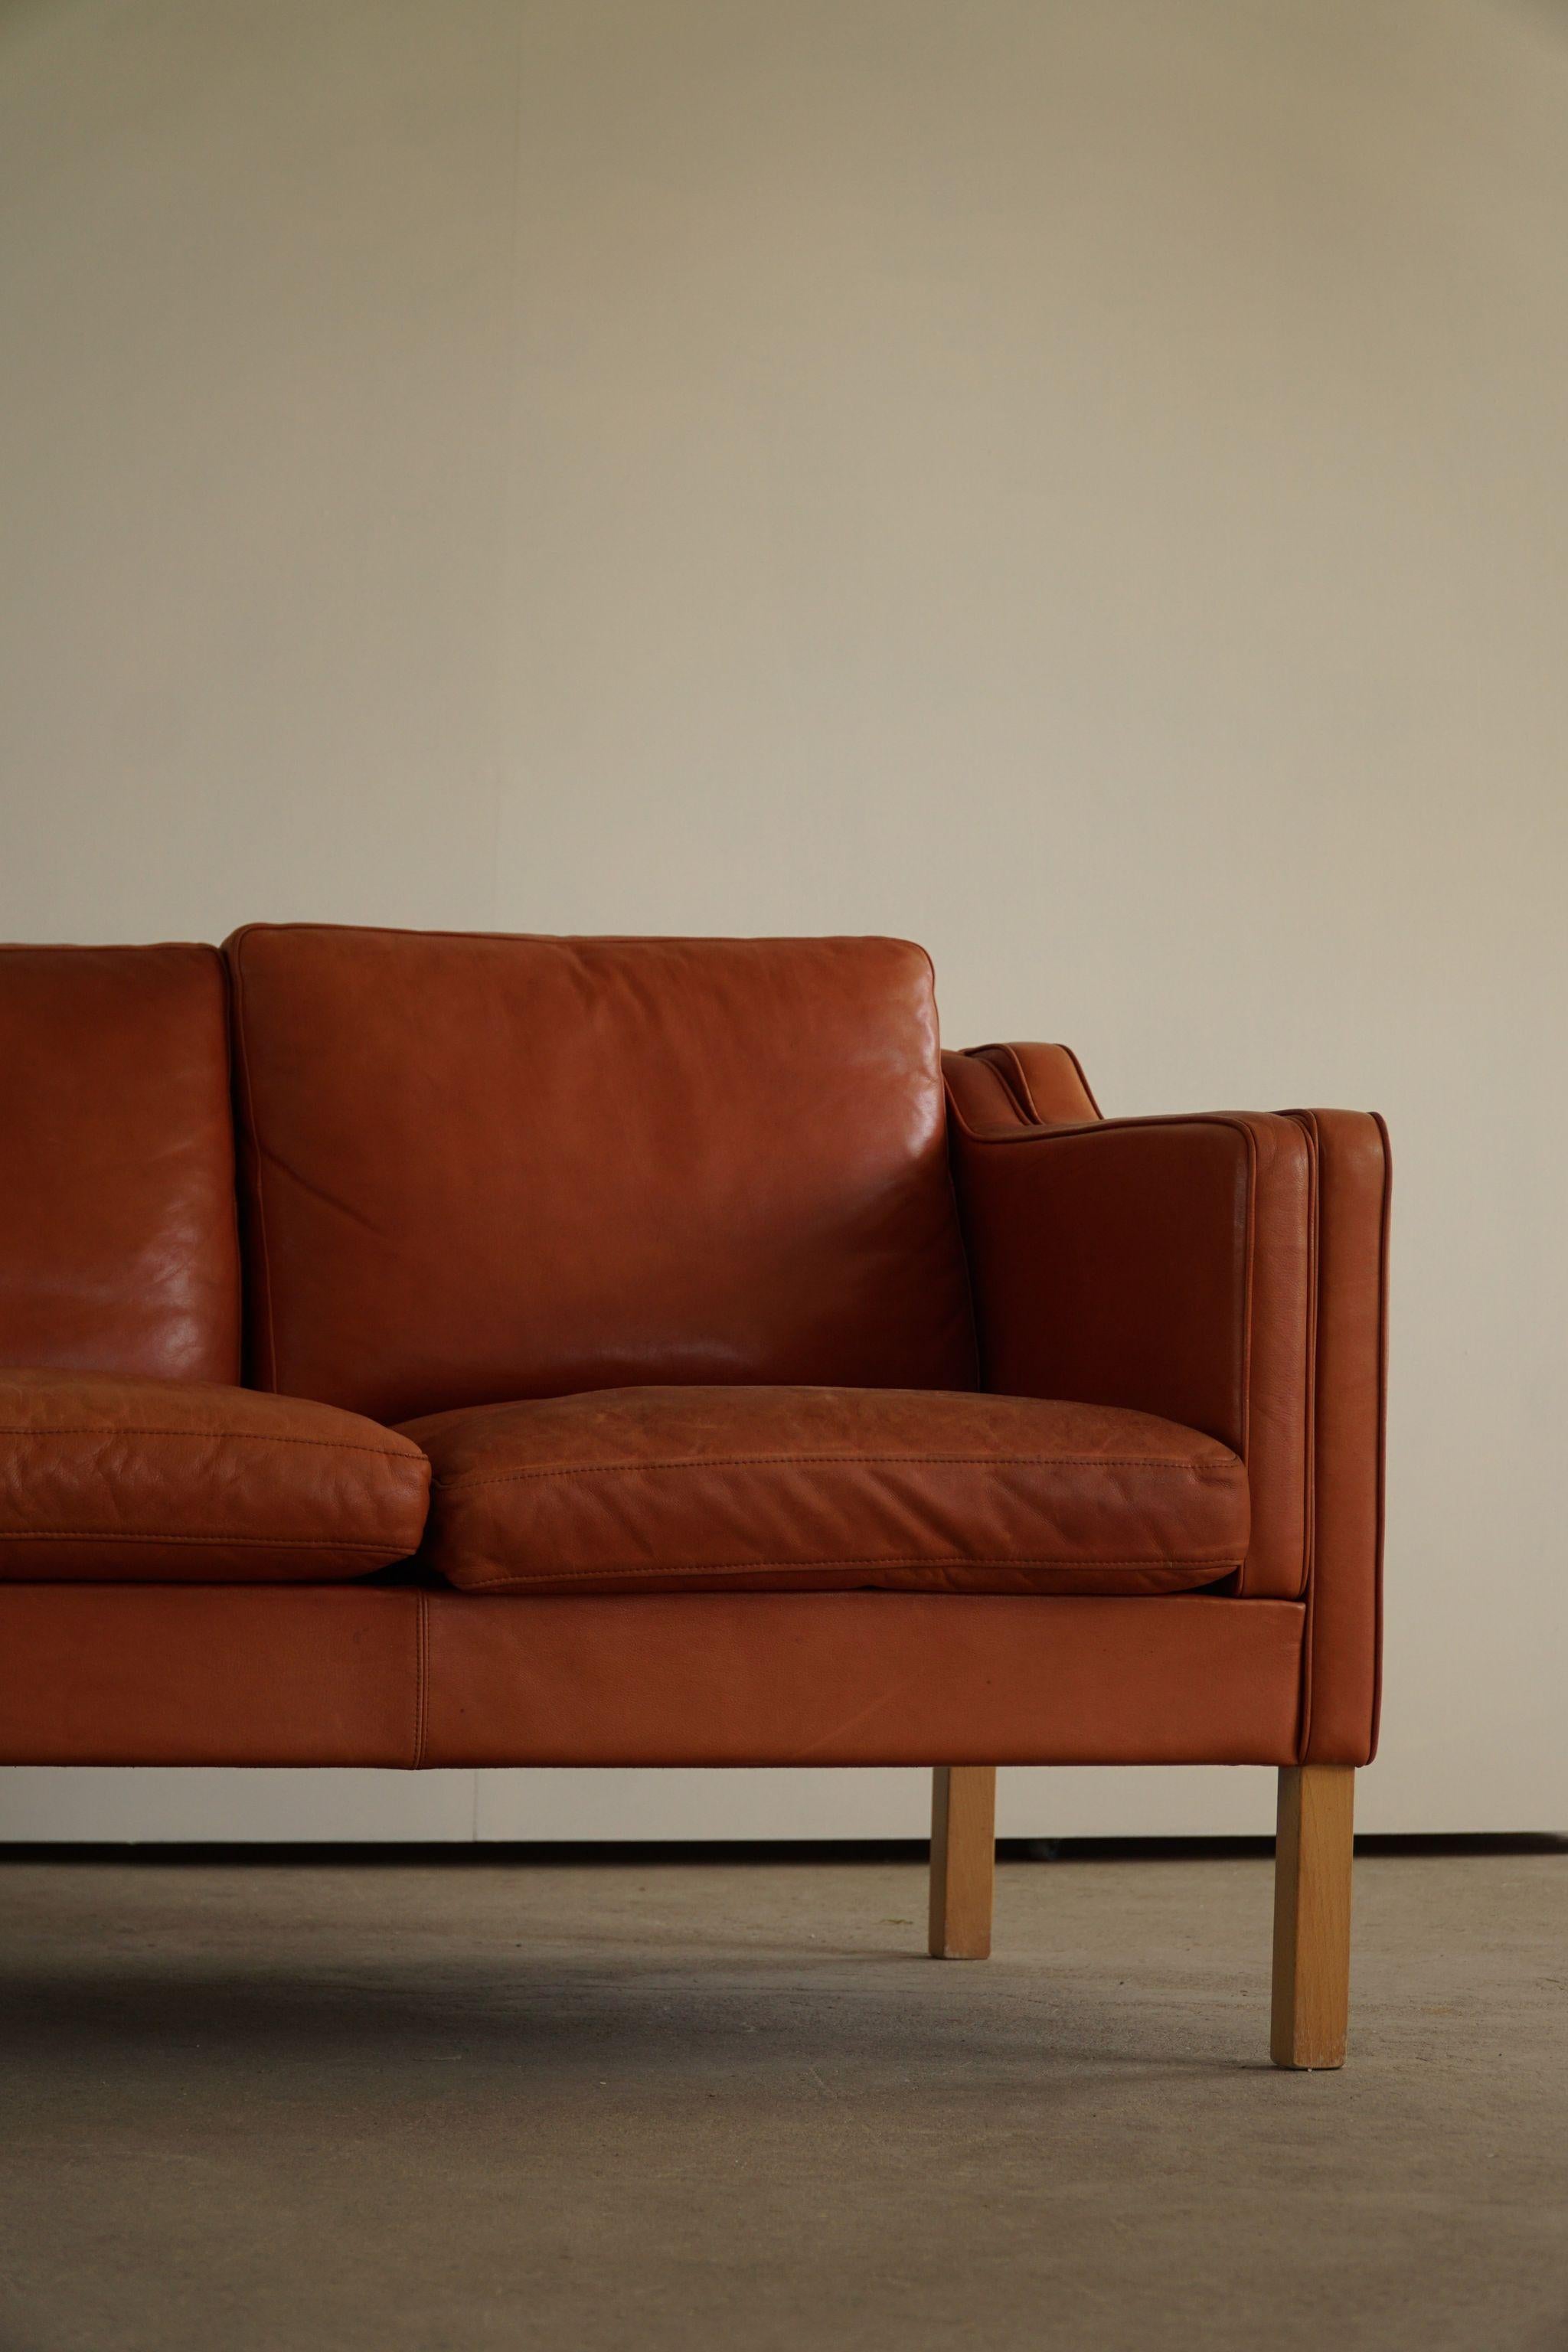 A classic Danish Mordern 3-seater sofa in cognac coloured leather, feets made in solid beech. Simple lines and a great warm patina featured in this sofa. 

With a heavy focus on functionality, this design style leans toward modernism, while